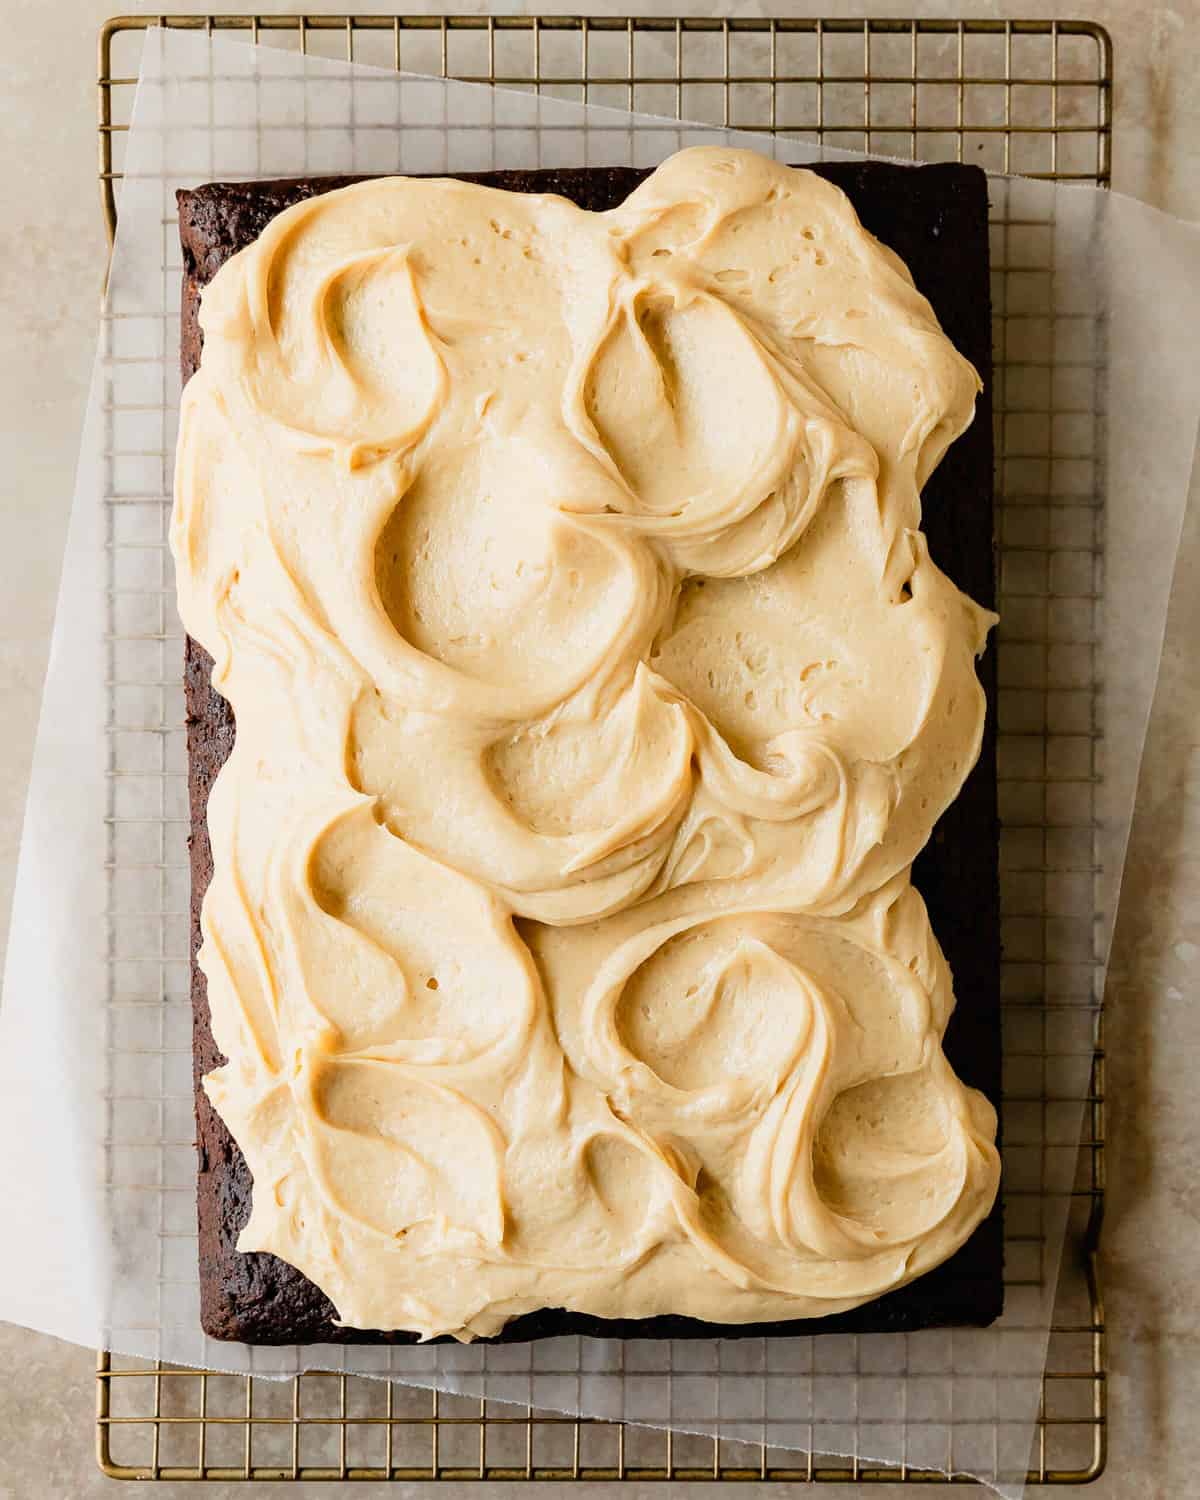 Chocolate banana cake is a moist and tender, from scratch chocolate cake filled with banana flavor. It’s topped with a rich and decadent peanut butter cream cheese frosting and shaved chocolate. This banana chocolate cake is not only quick and simple to make using two bowls and a whisk, it’s also the easy perfect cake for any occasion. 